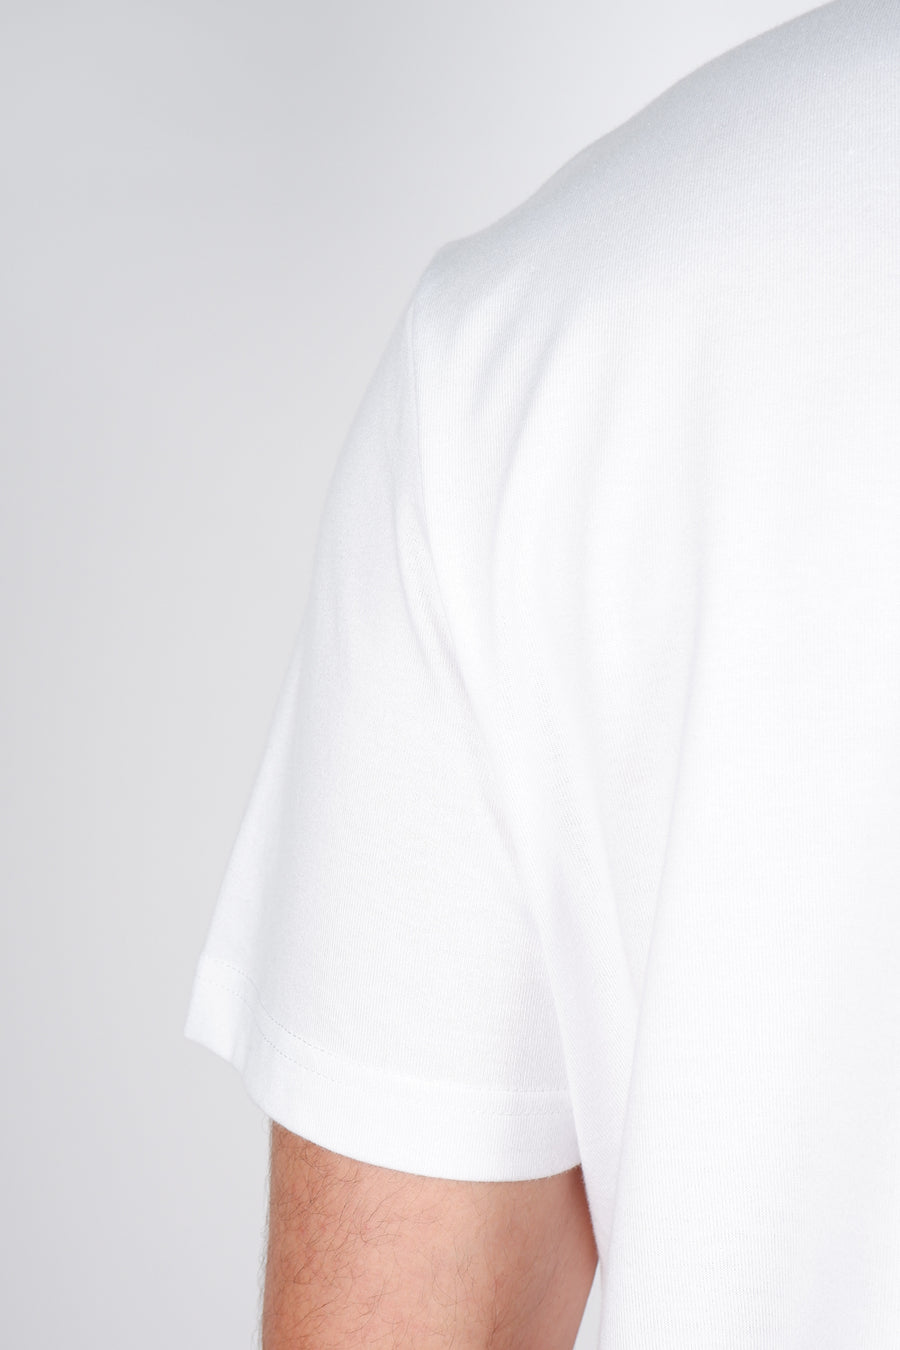 Buy the Antony Morato Taped Pocket Detail T-Shirt White at Intro. Spend £50 for free UK delivery. Official stockists. We ship worldwide.